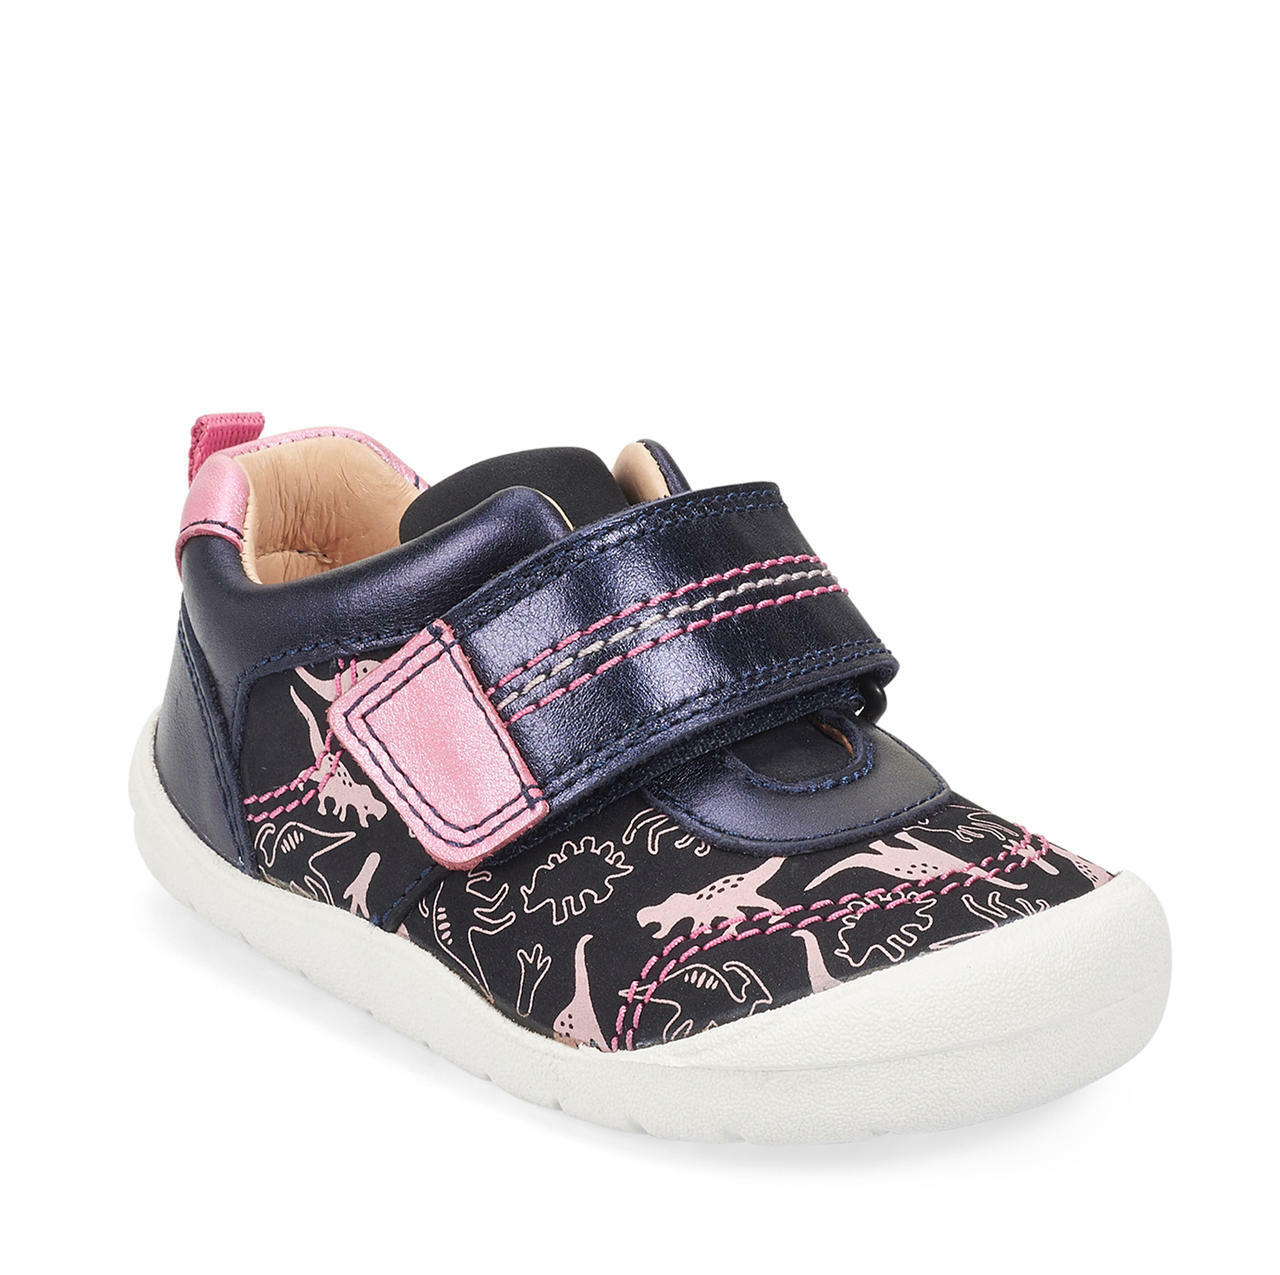 StartRite FOOTPRINT Leather Shoes (Pink Dino)  20-23.5